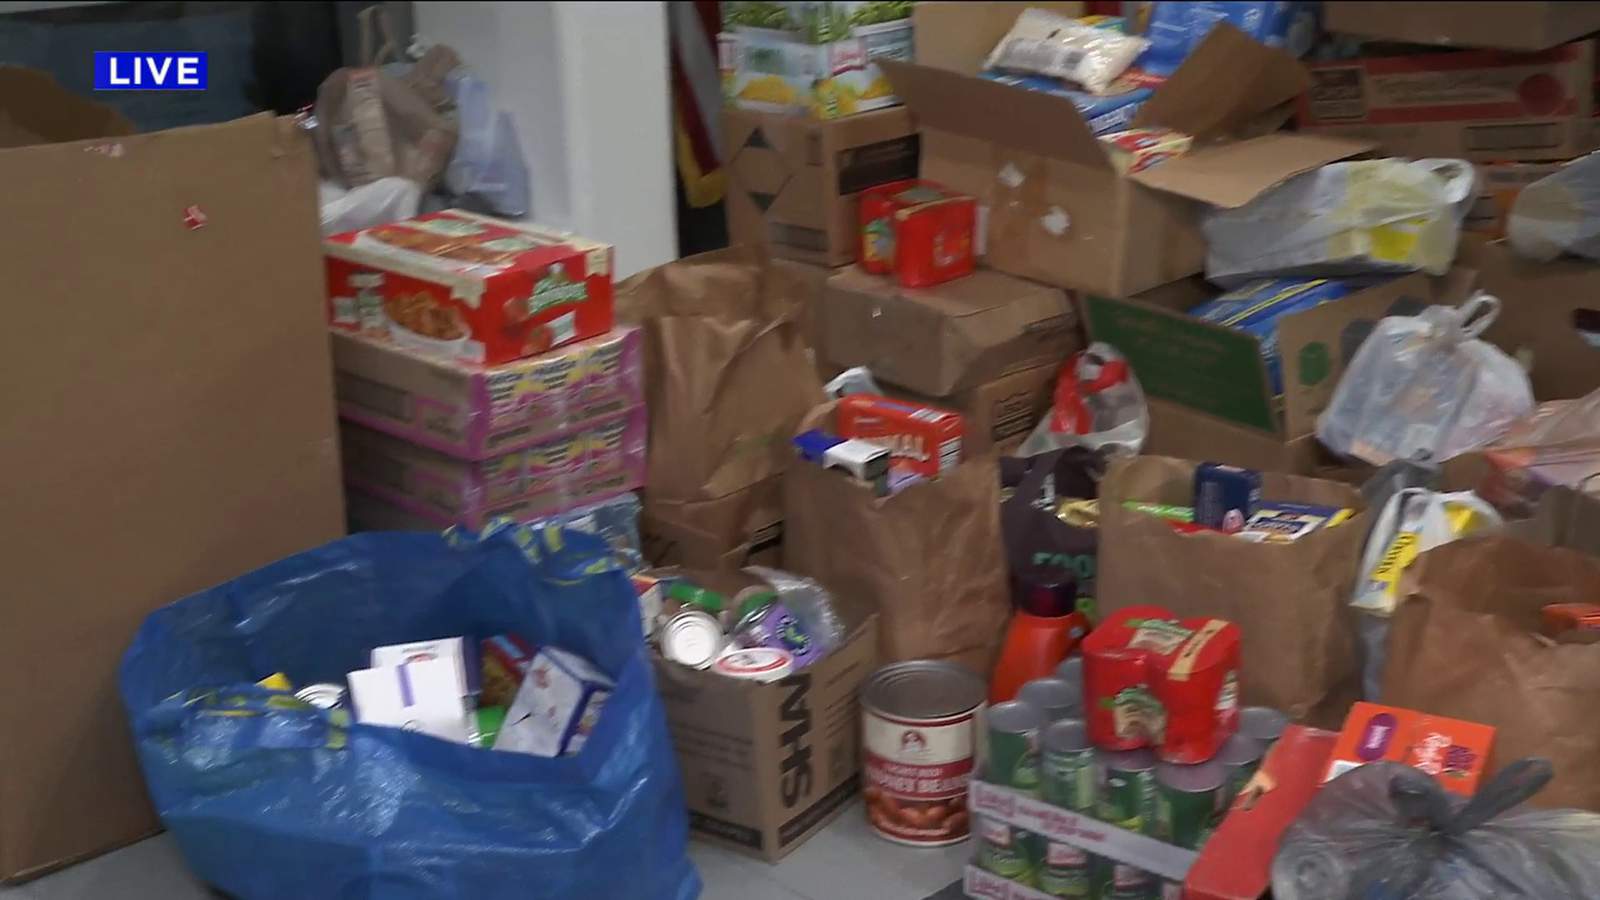 Positively Jax food drive brings in flood of donations